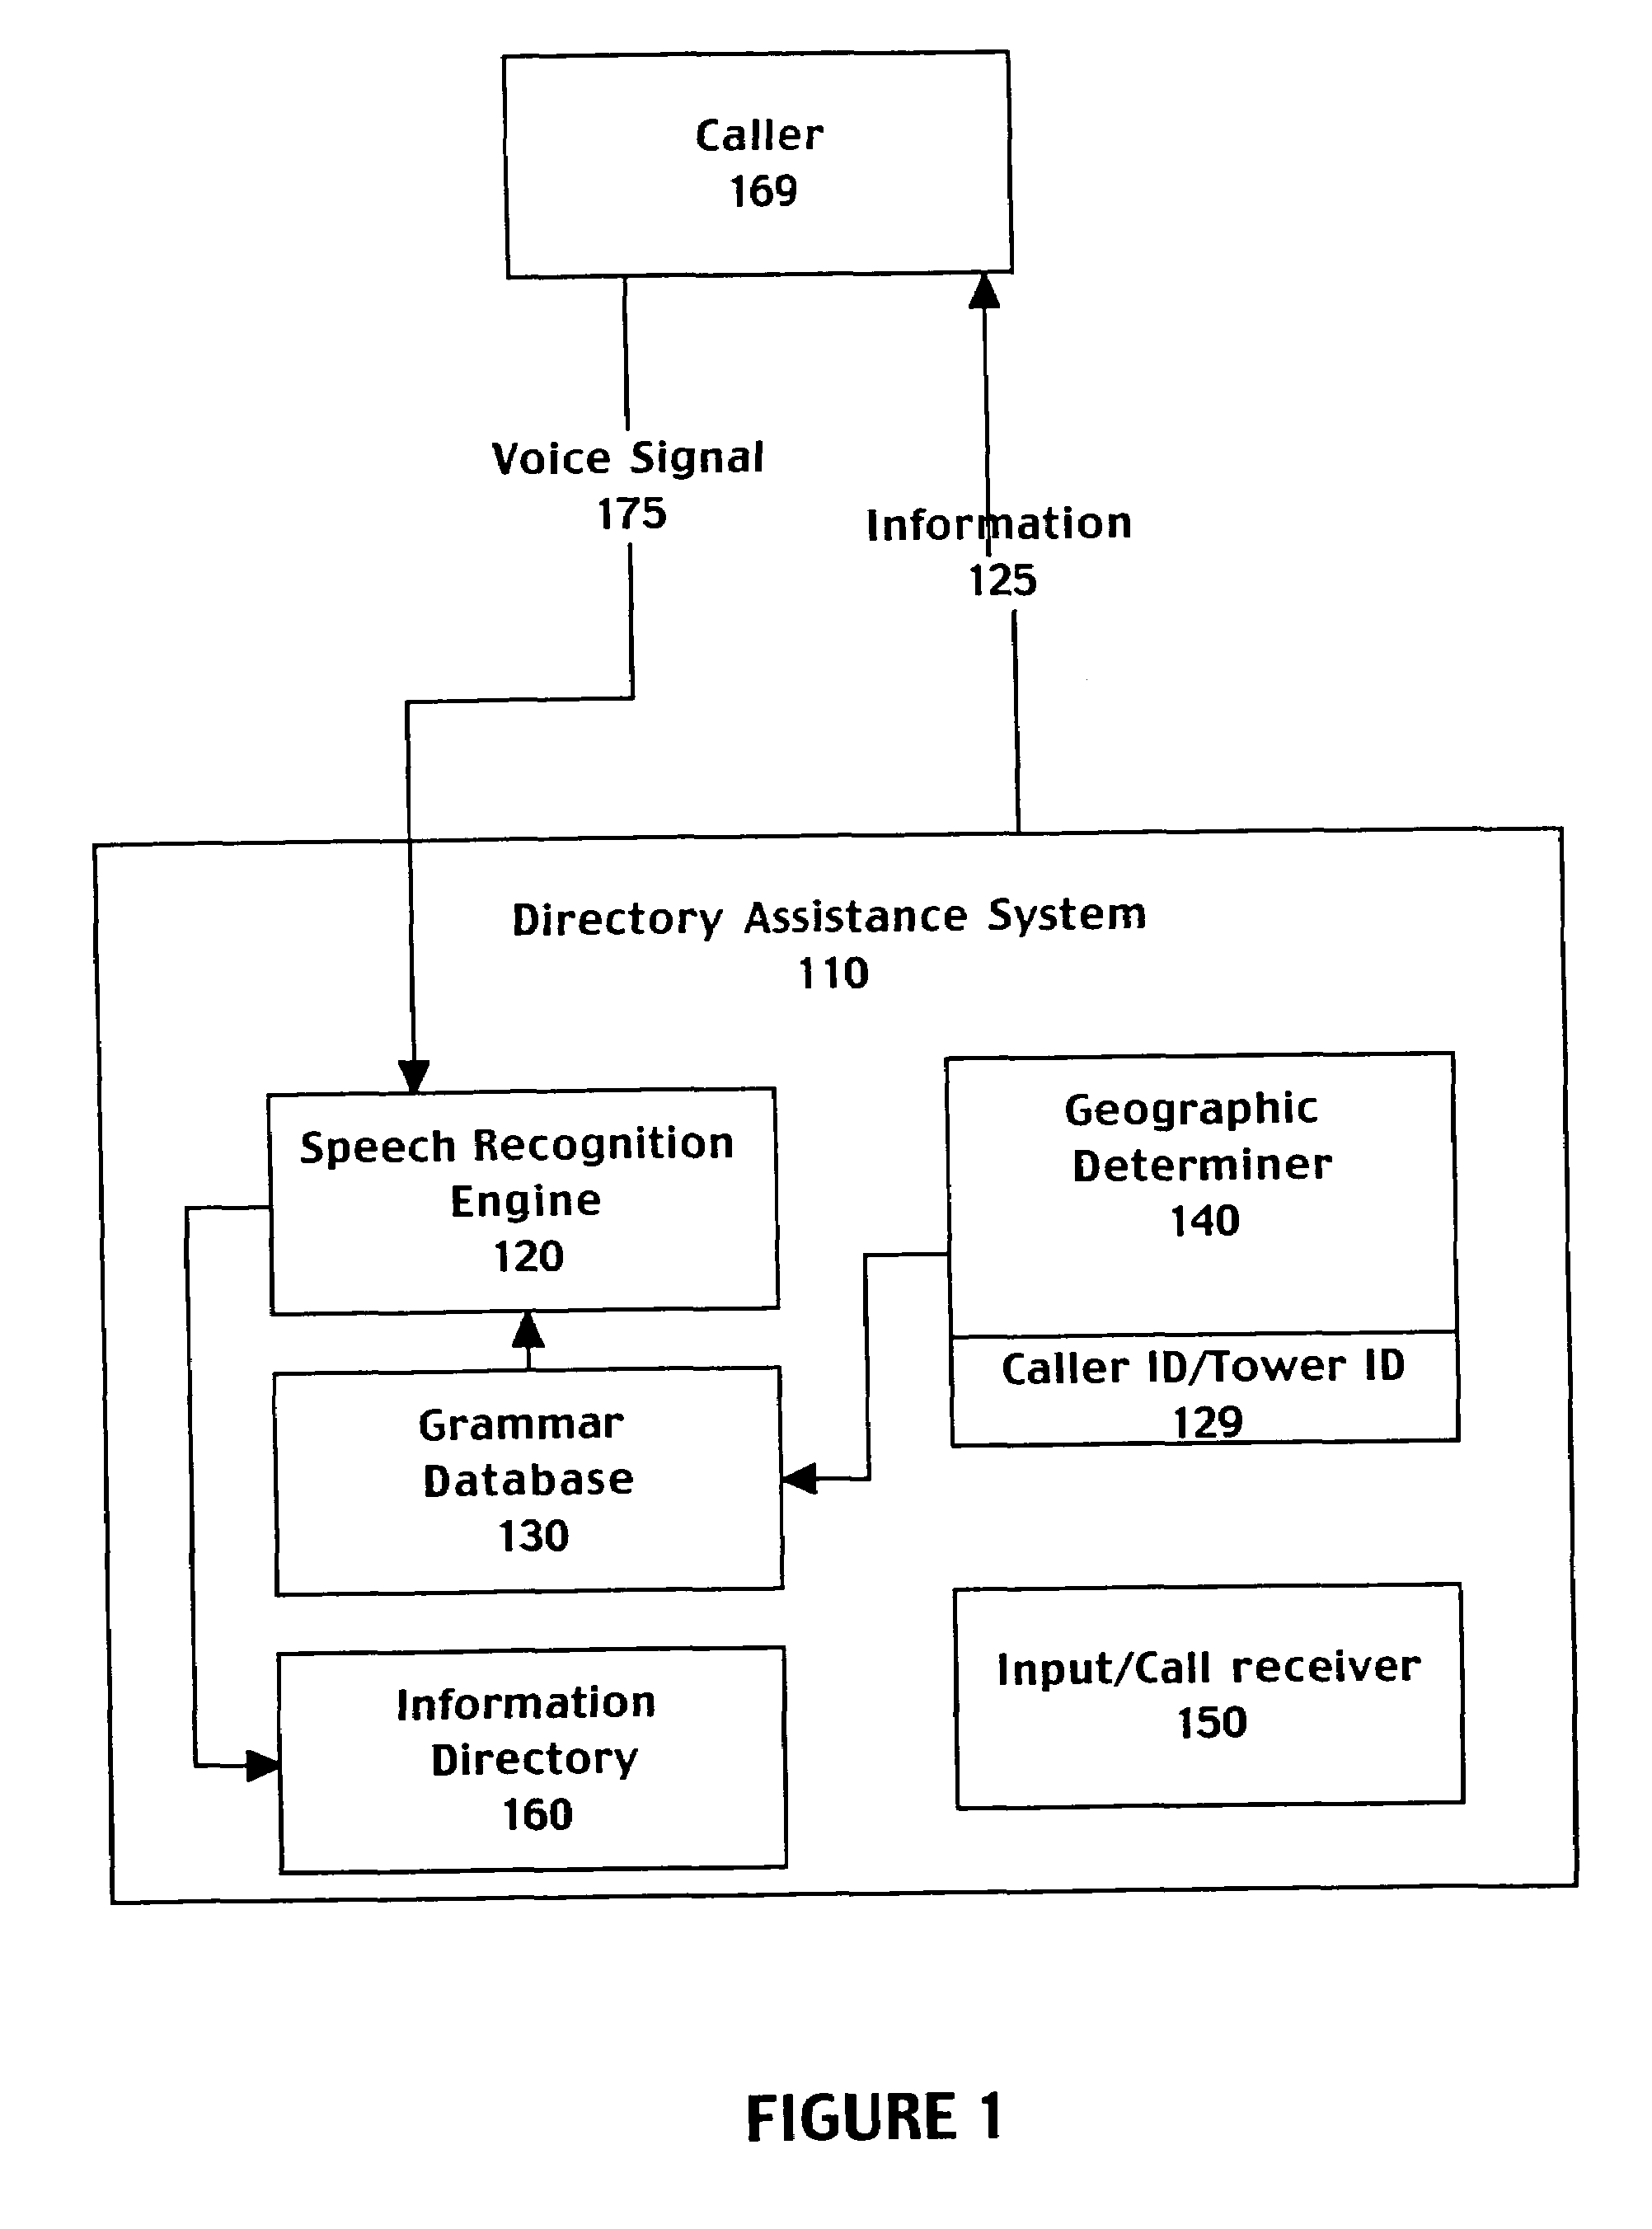 Method and system for selecting grammars based on geographic information associated with a caller